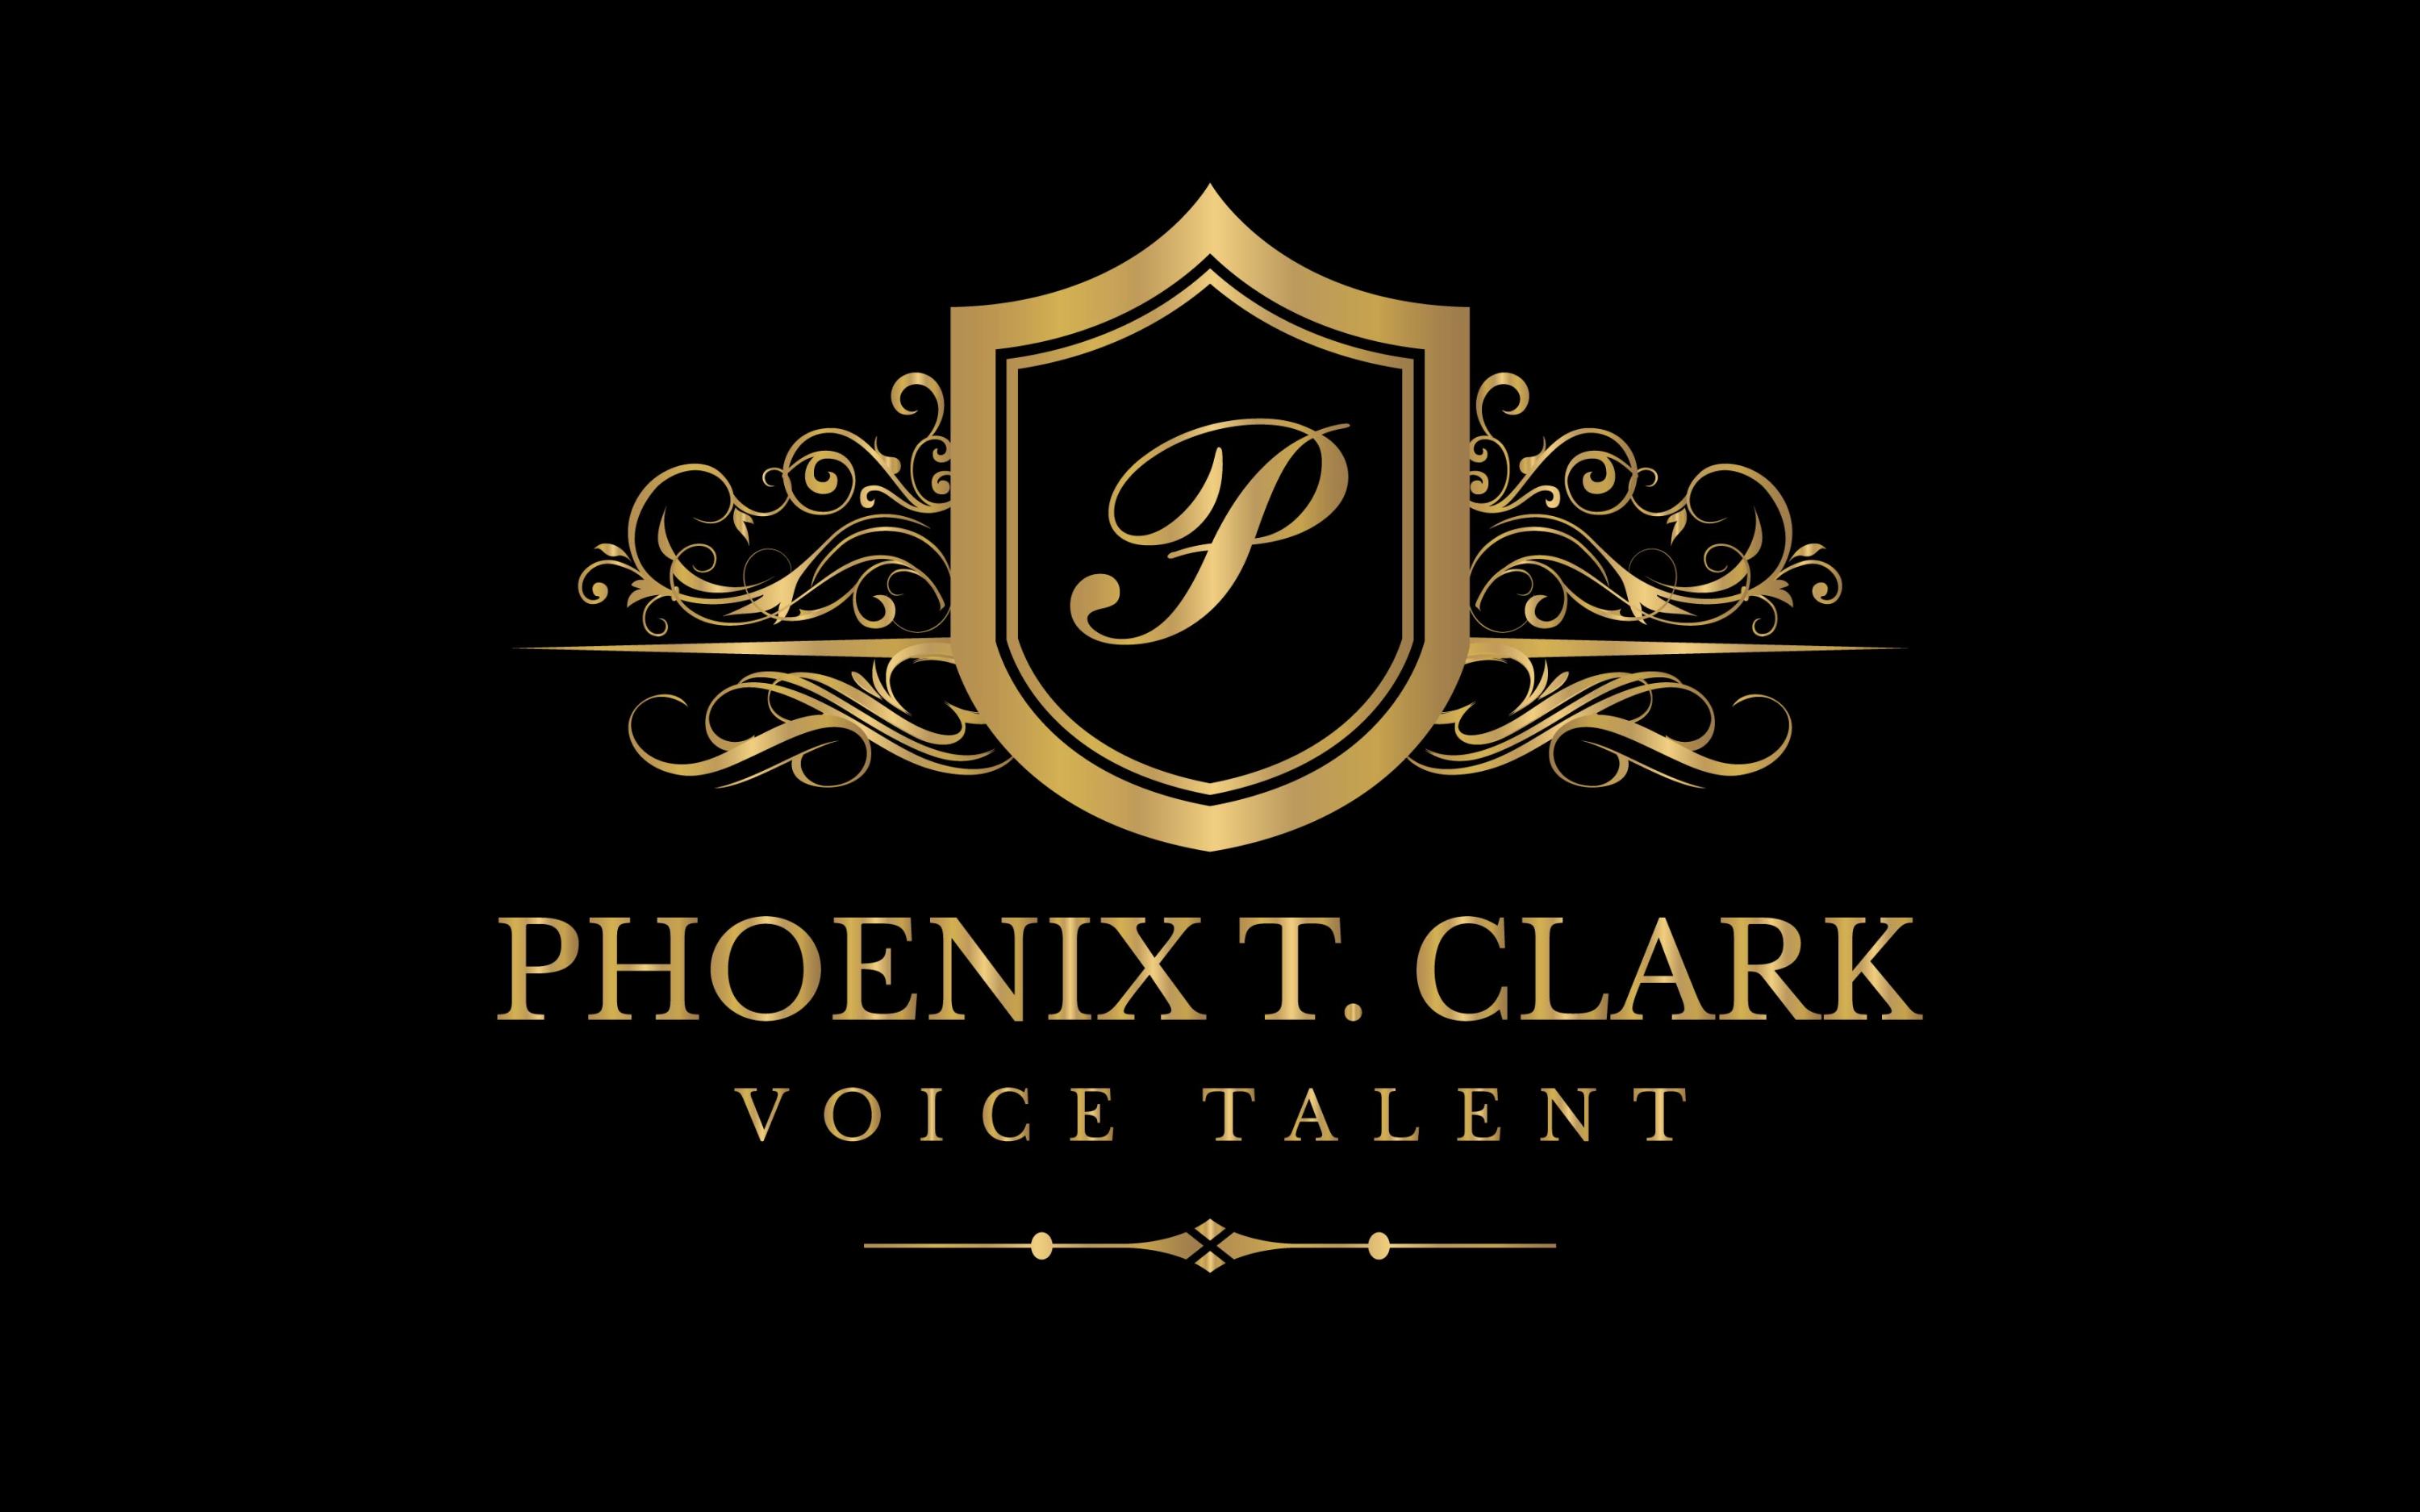 Professional Voice Over Talent to Record your voice mail and IVR systems